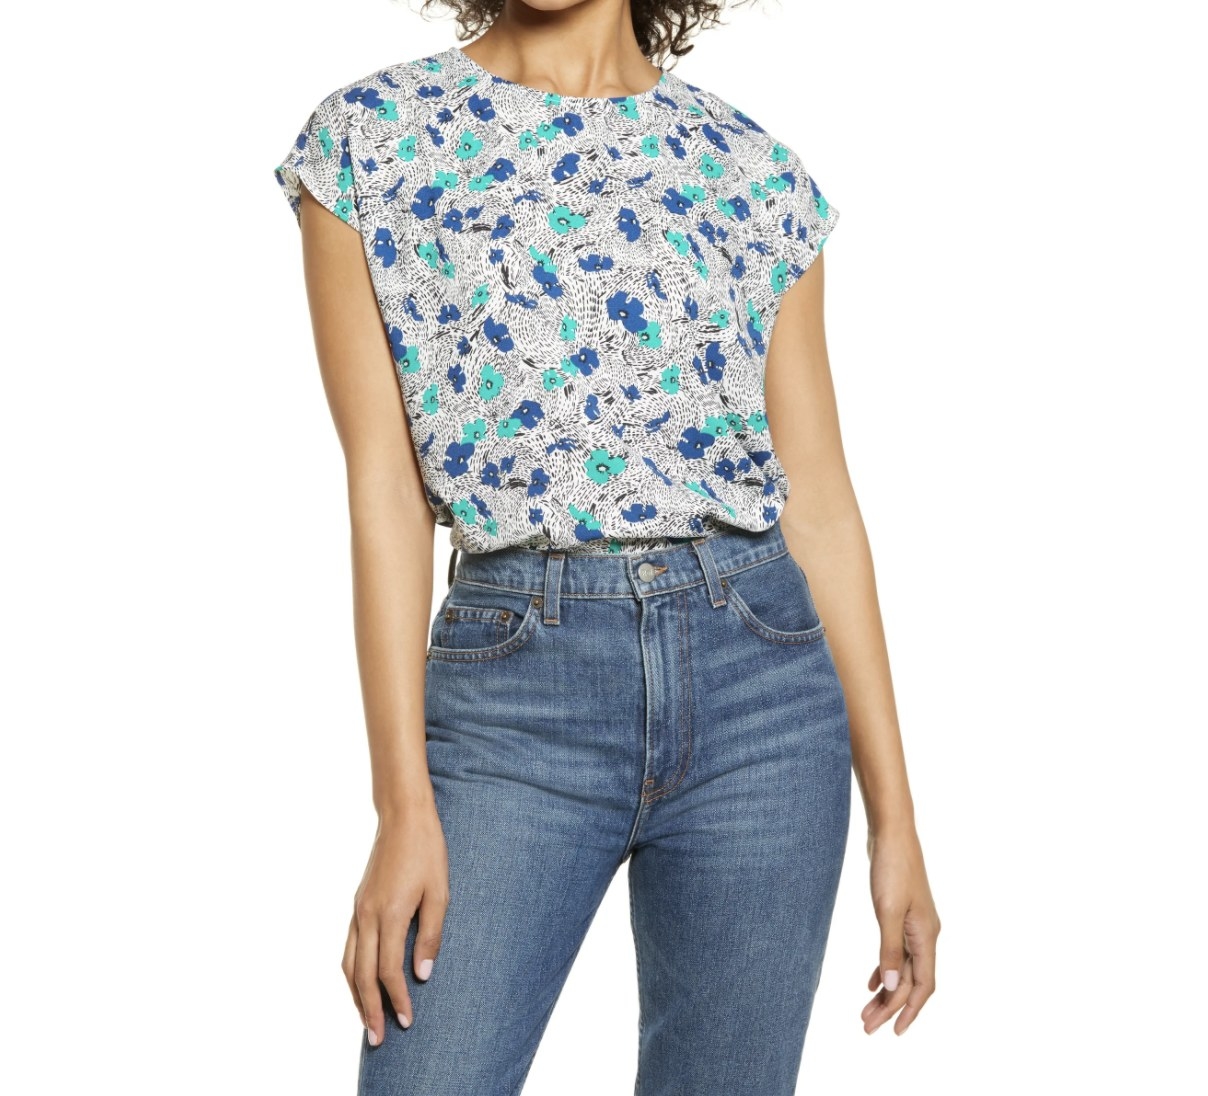 Model is wearing a patterned blouse and denim jeans